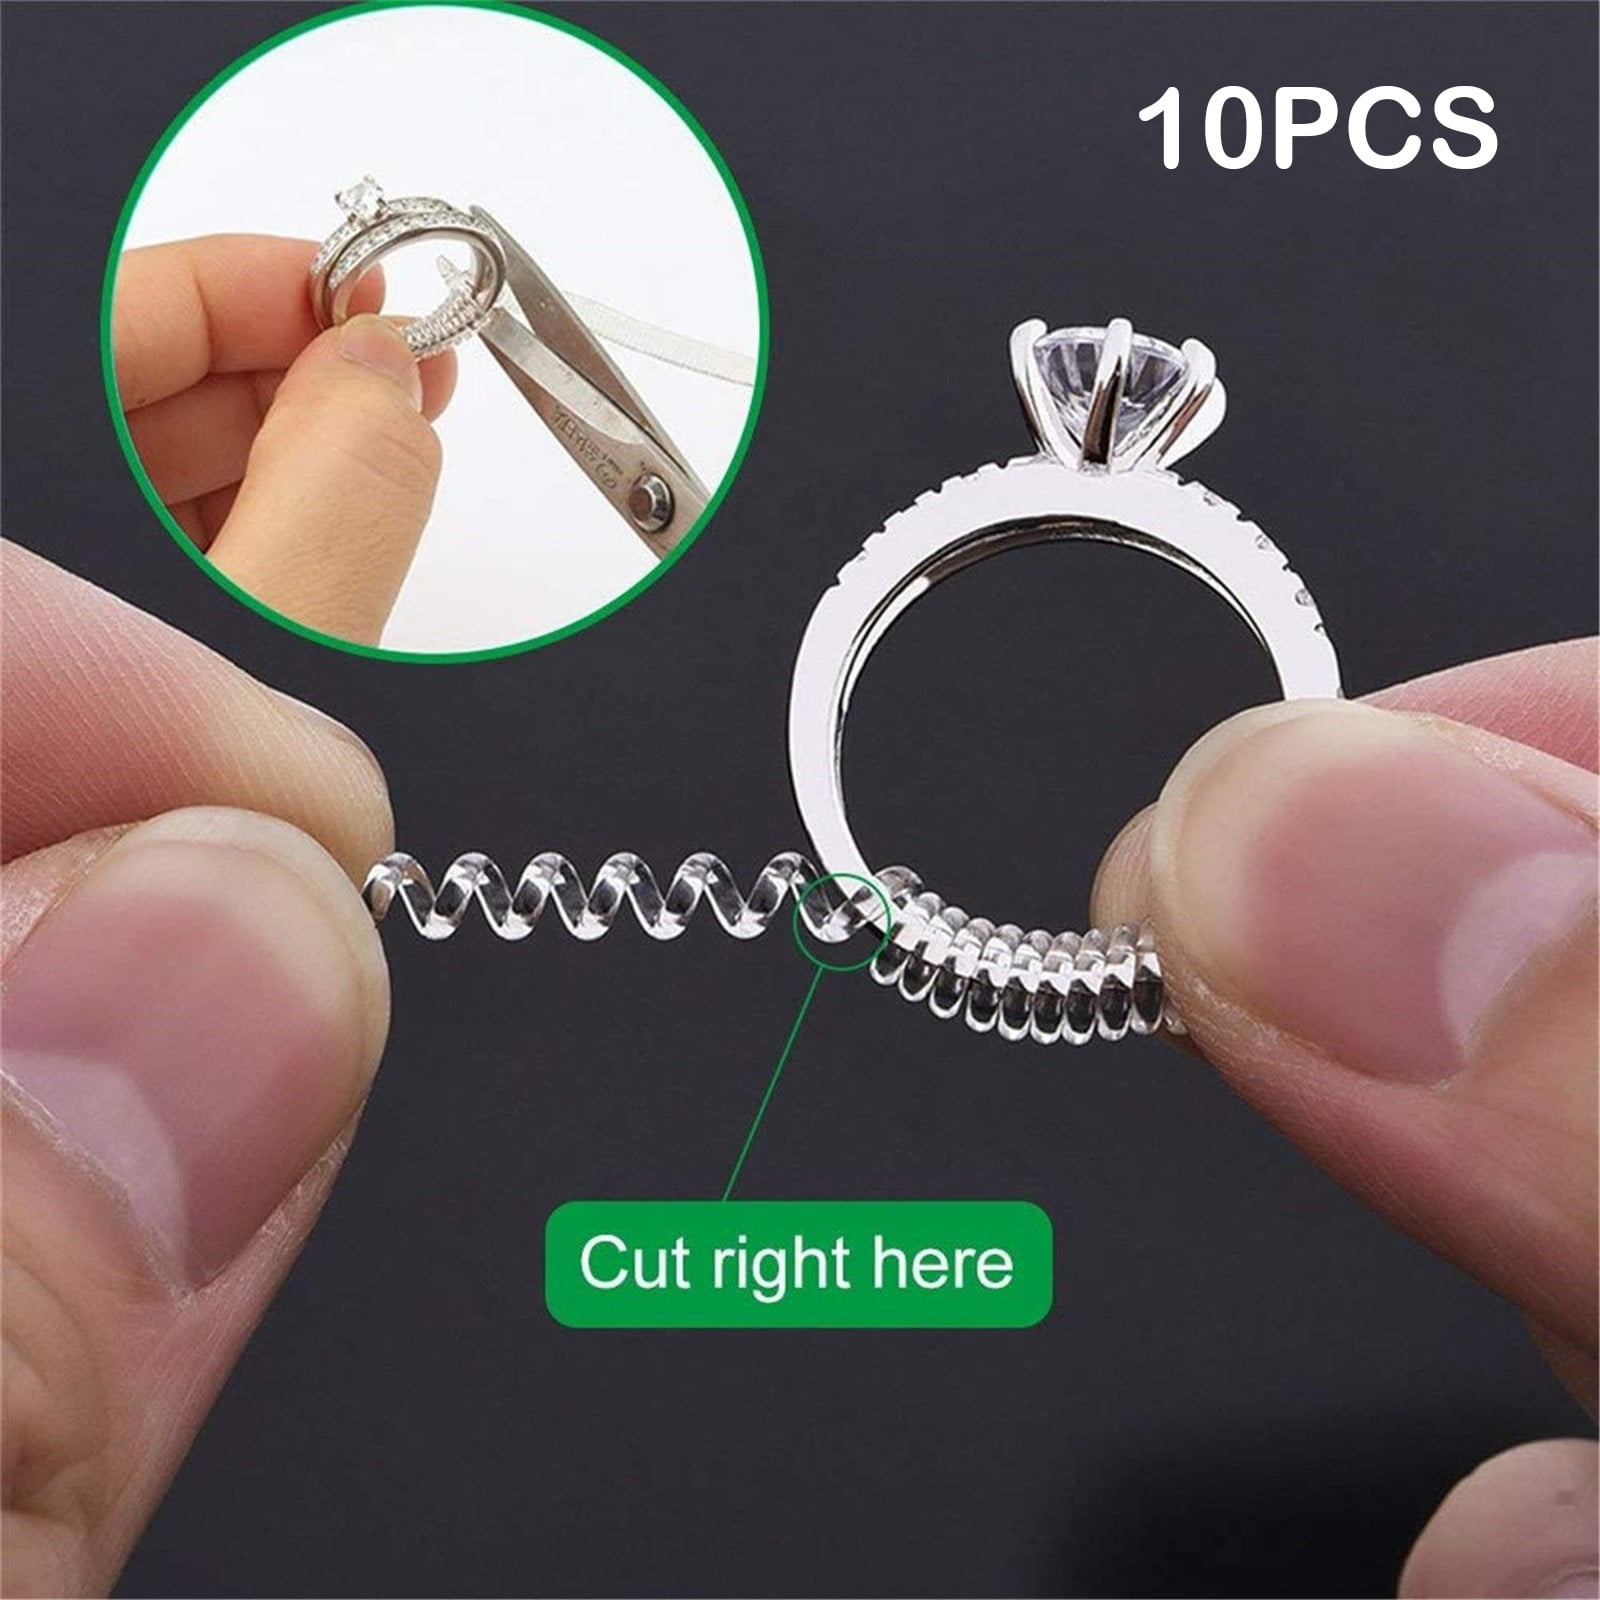 Qoo10 - 15pcs/set Ring Size Adjuster Sizing Tool Ring Sizer for Loose Rings  : Jewelry/Watches